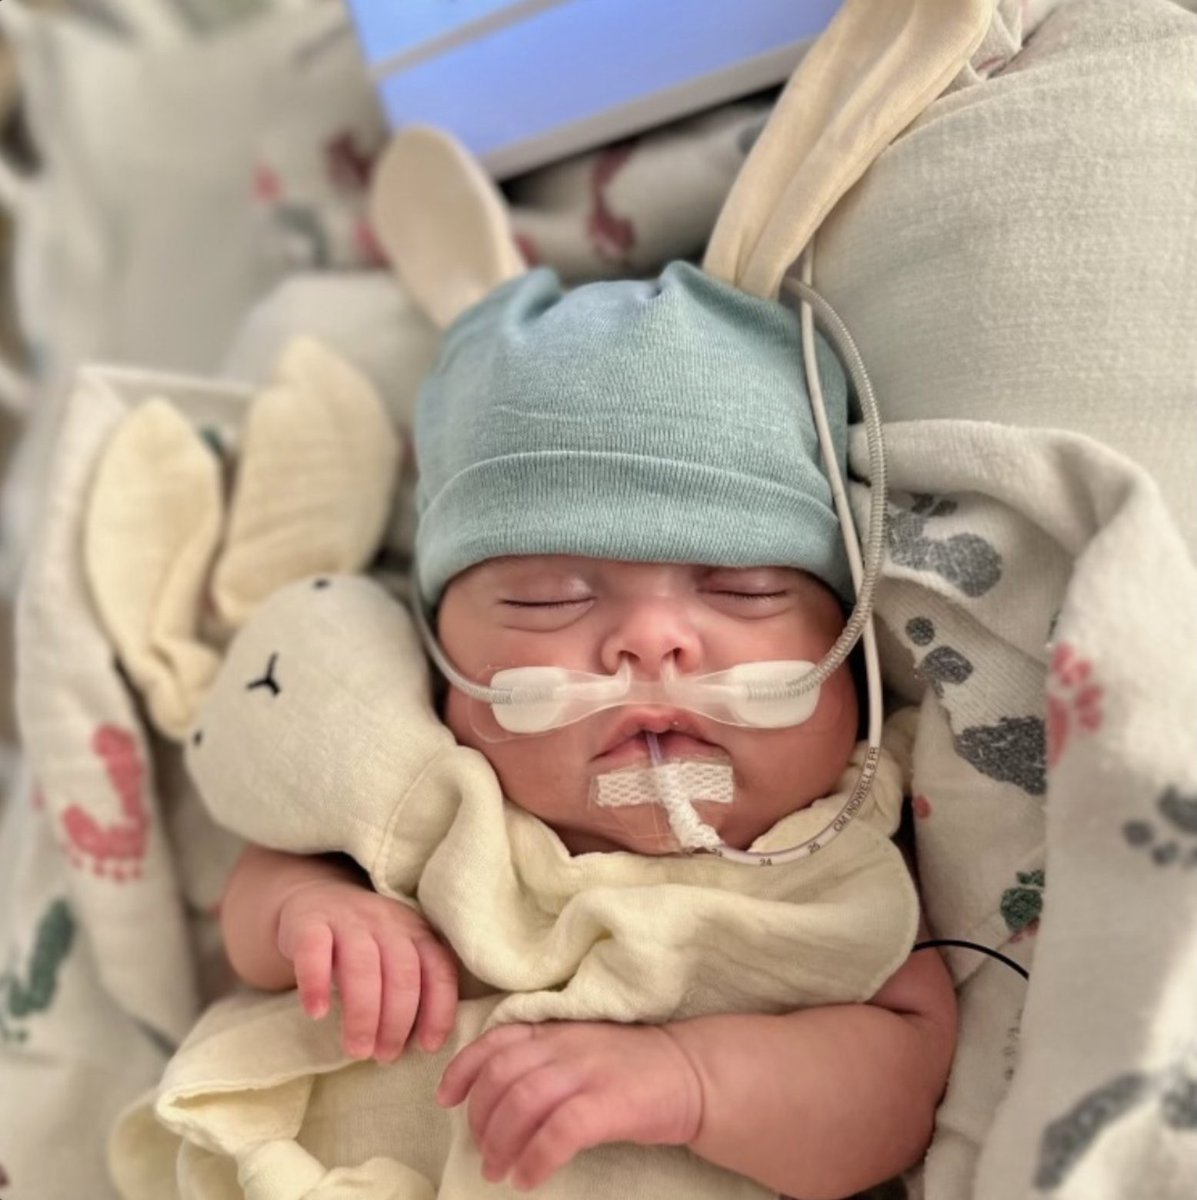 Meet Kylo! 💙 While in the NICU at a nearby hospital, his family has received essential support and services at @RMHCNC. To learn more about our impact, visit rmhc.org